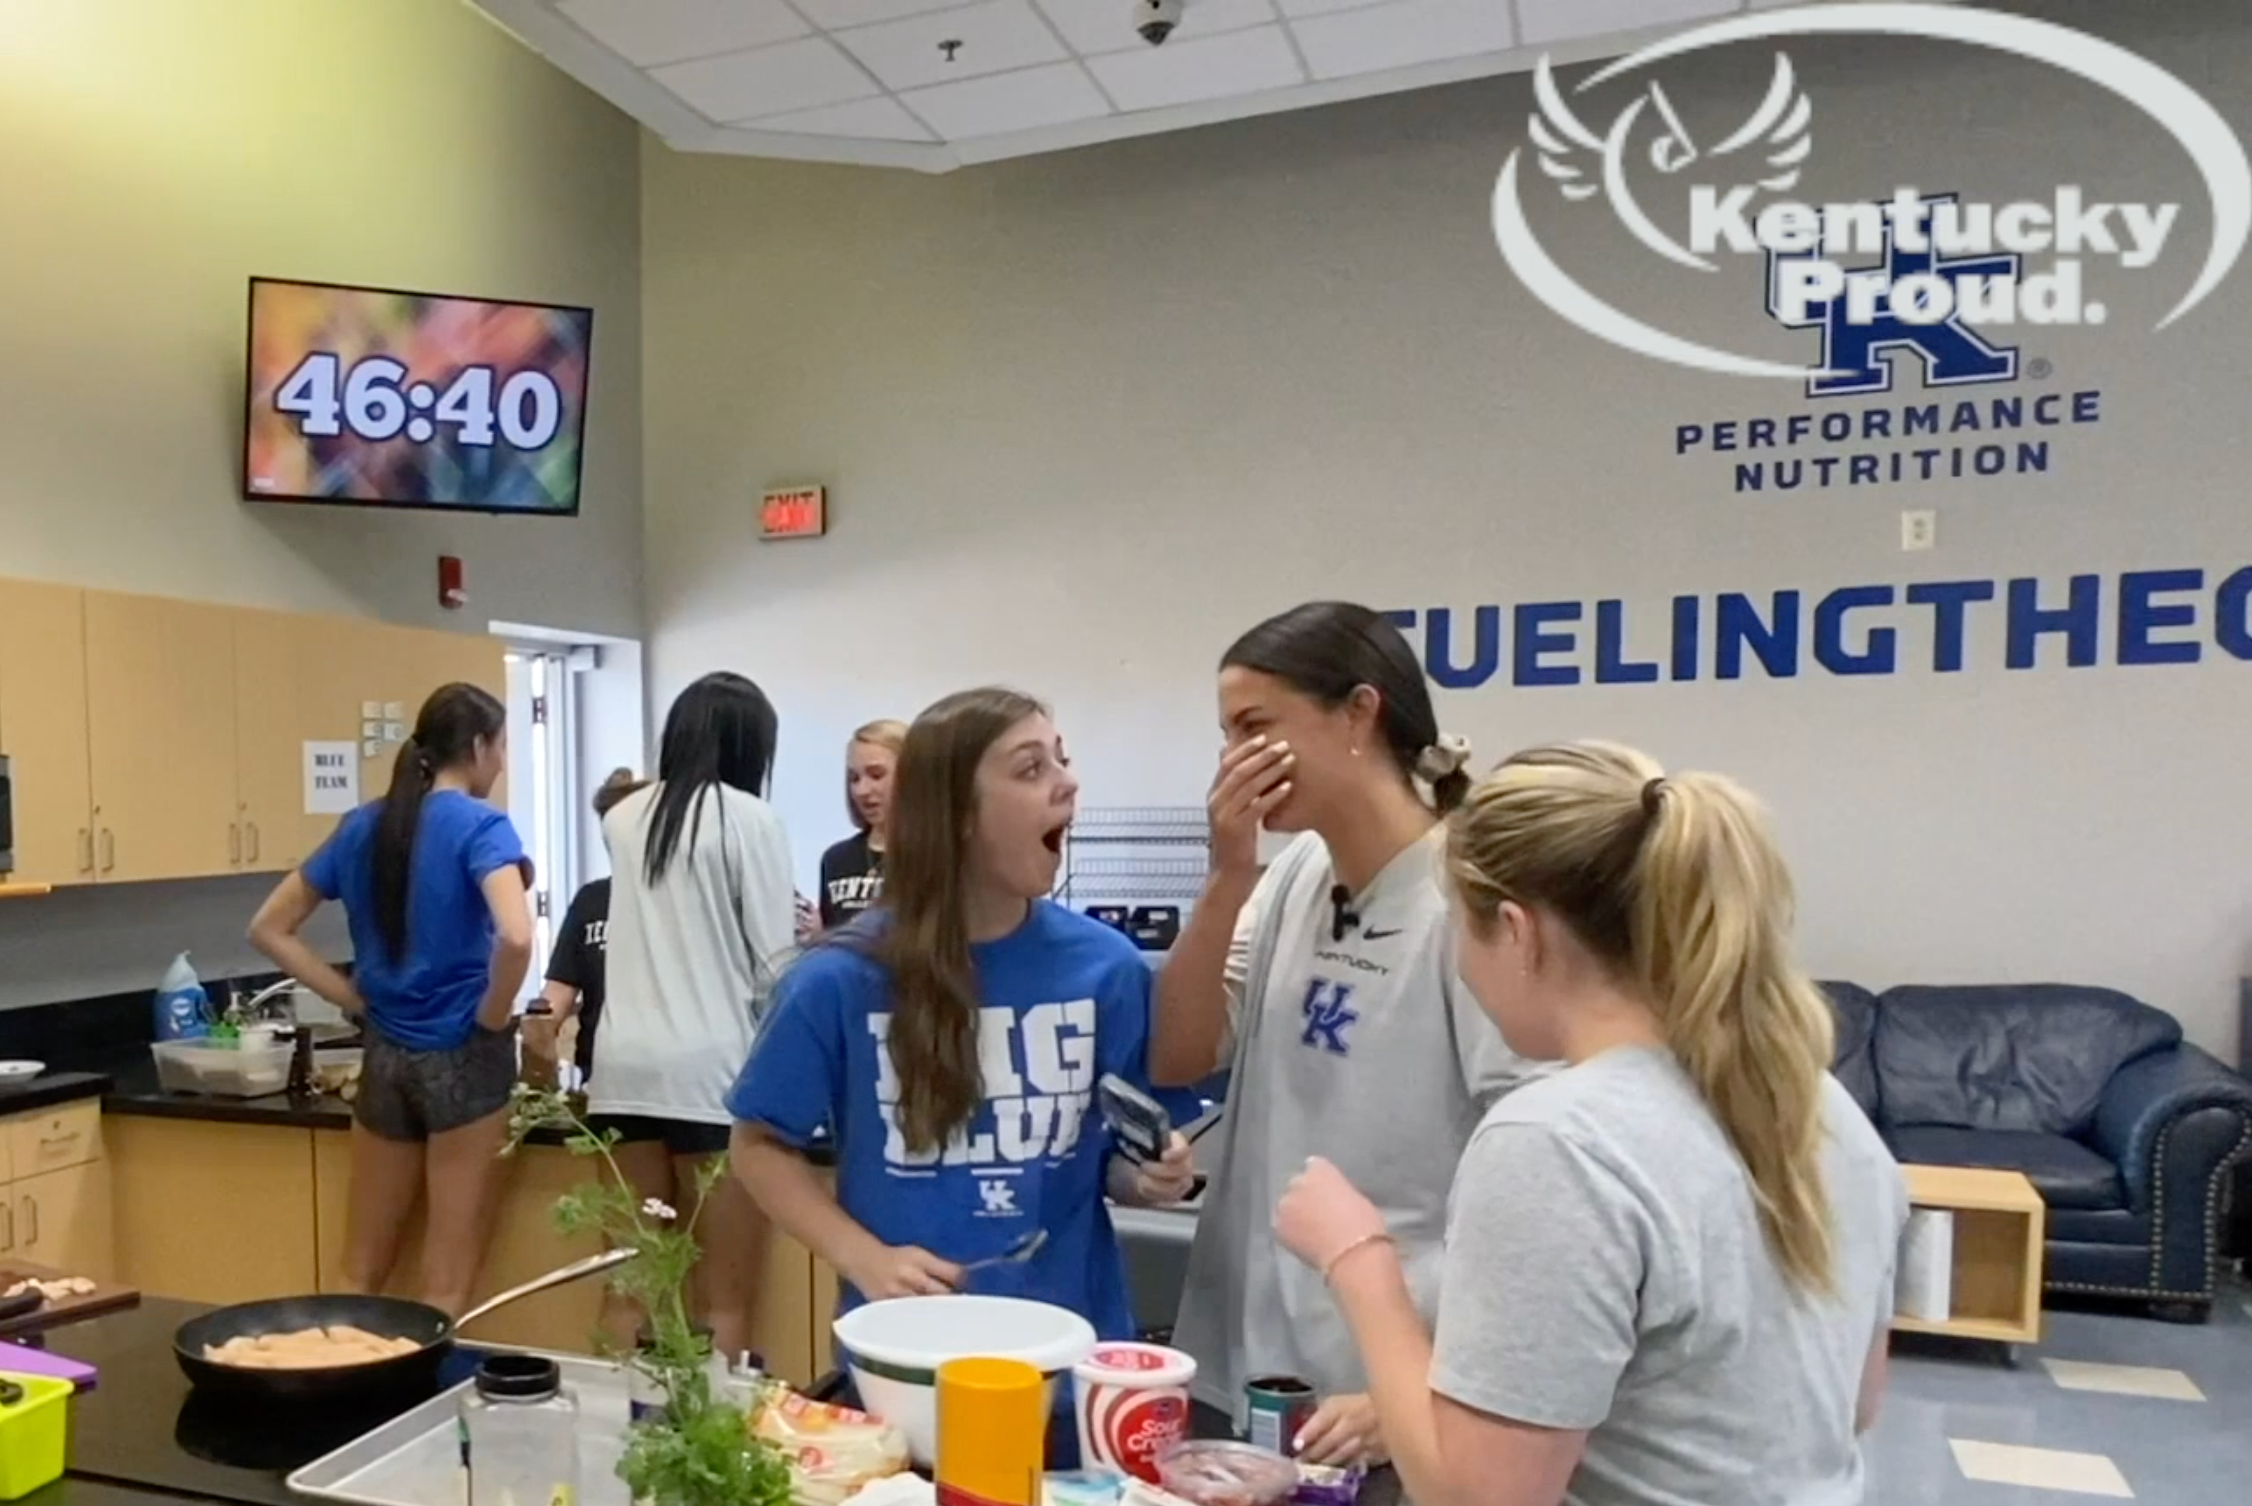 Cooking with Kentucky Volleyball, presented by Kentucky Proud